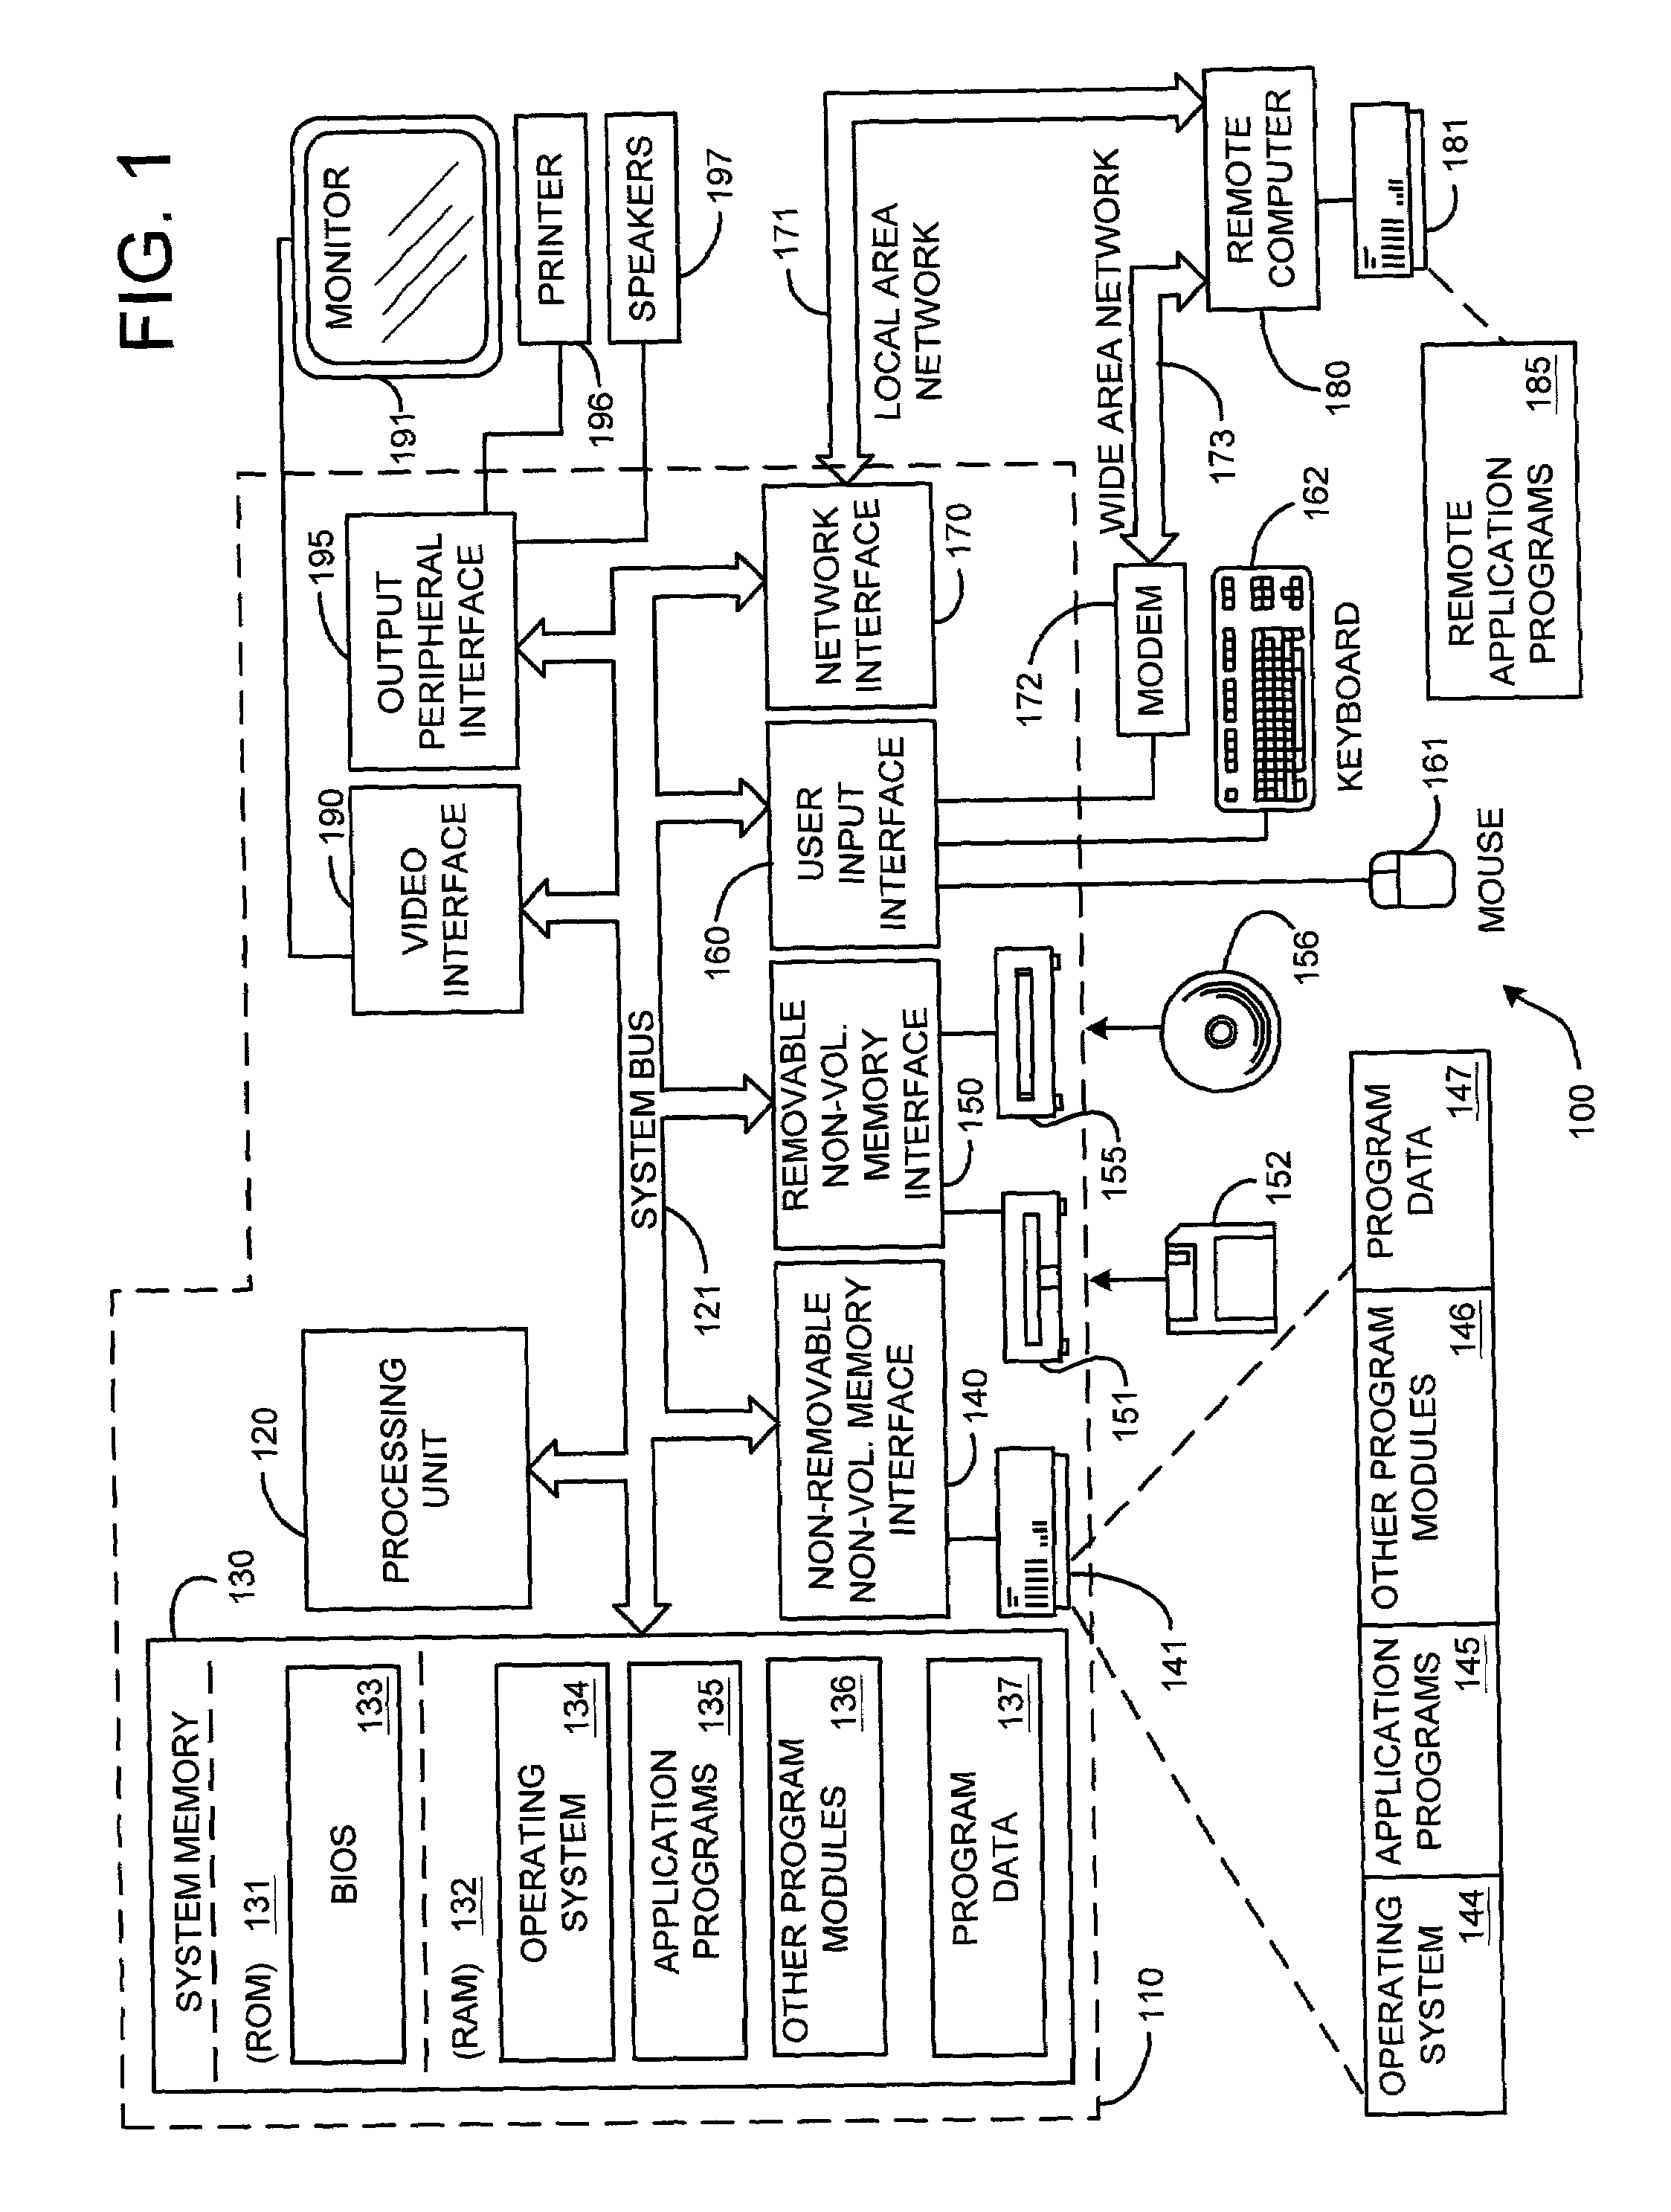 System and method for using dynamic web components to remotely control the security state of web pages